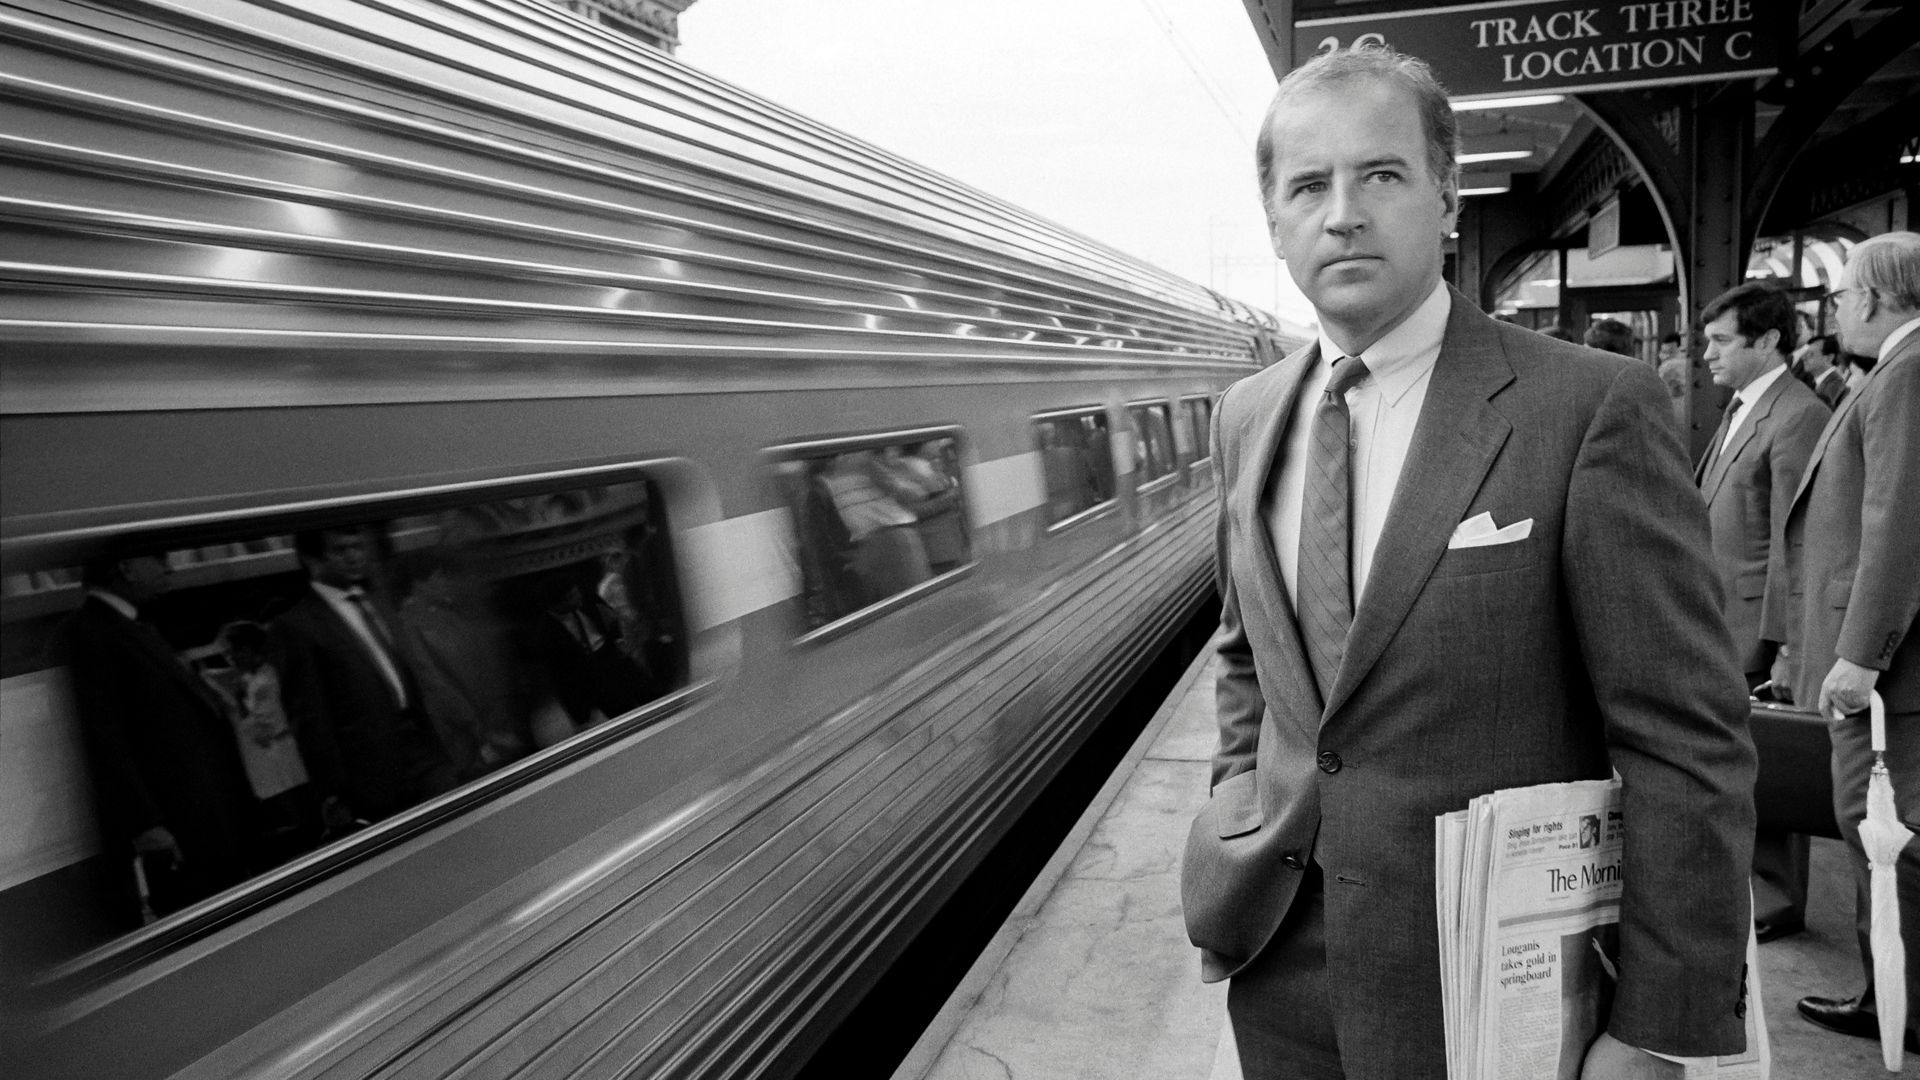 Biden holds a newspaper in a black and white photograph while waiting for a train